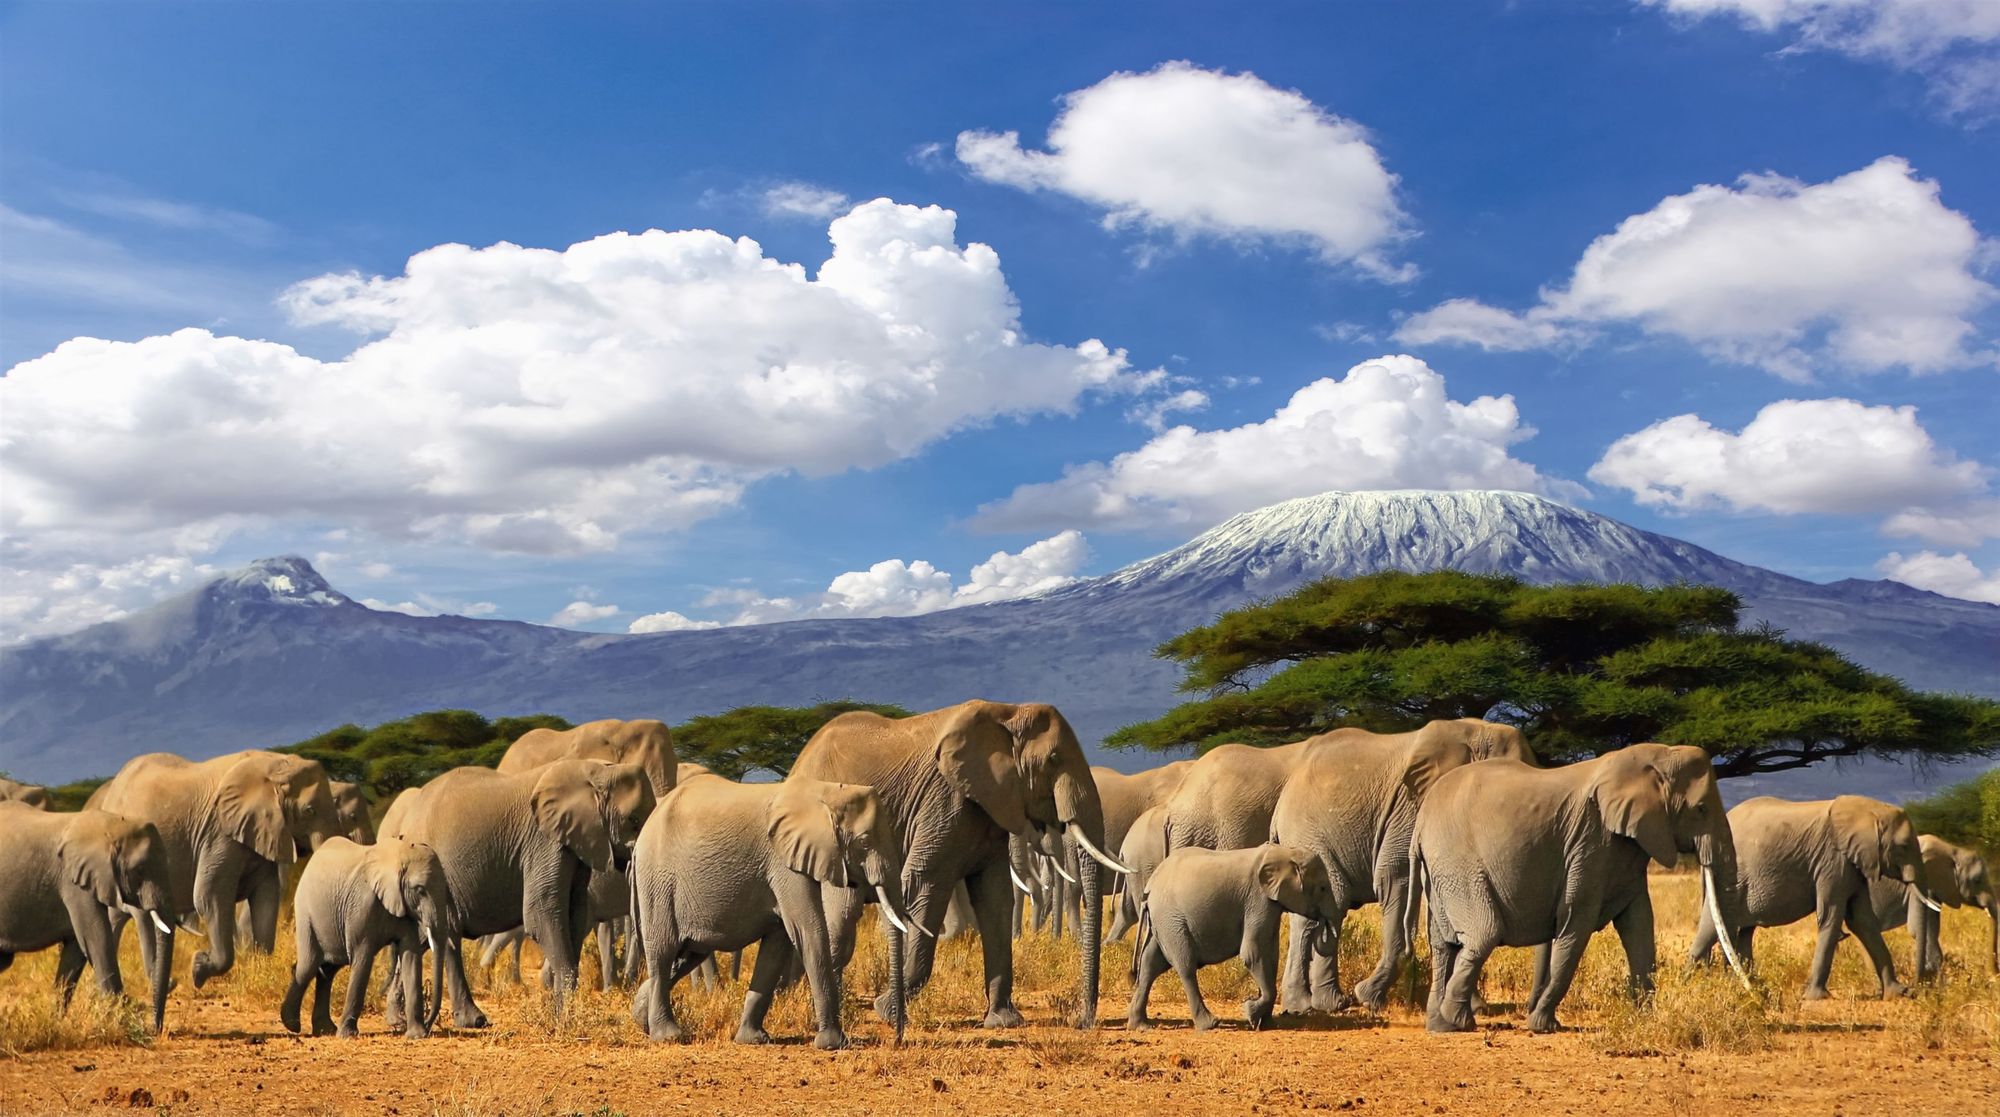 A herd of elephants pass beneath the summit of Mount Kilimanjaro, the highest peak in Africa. Photo: Getty